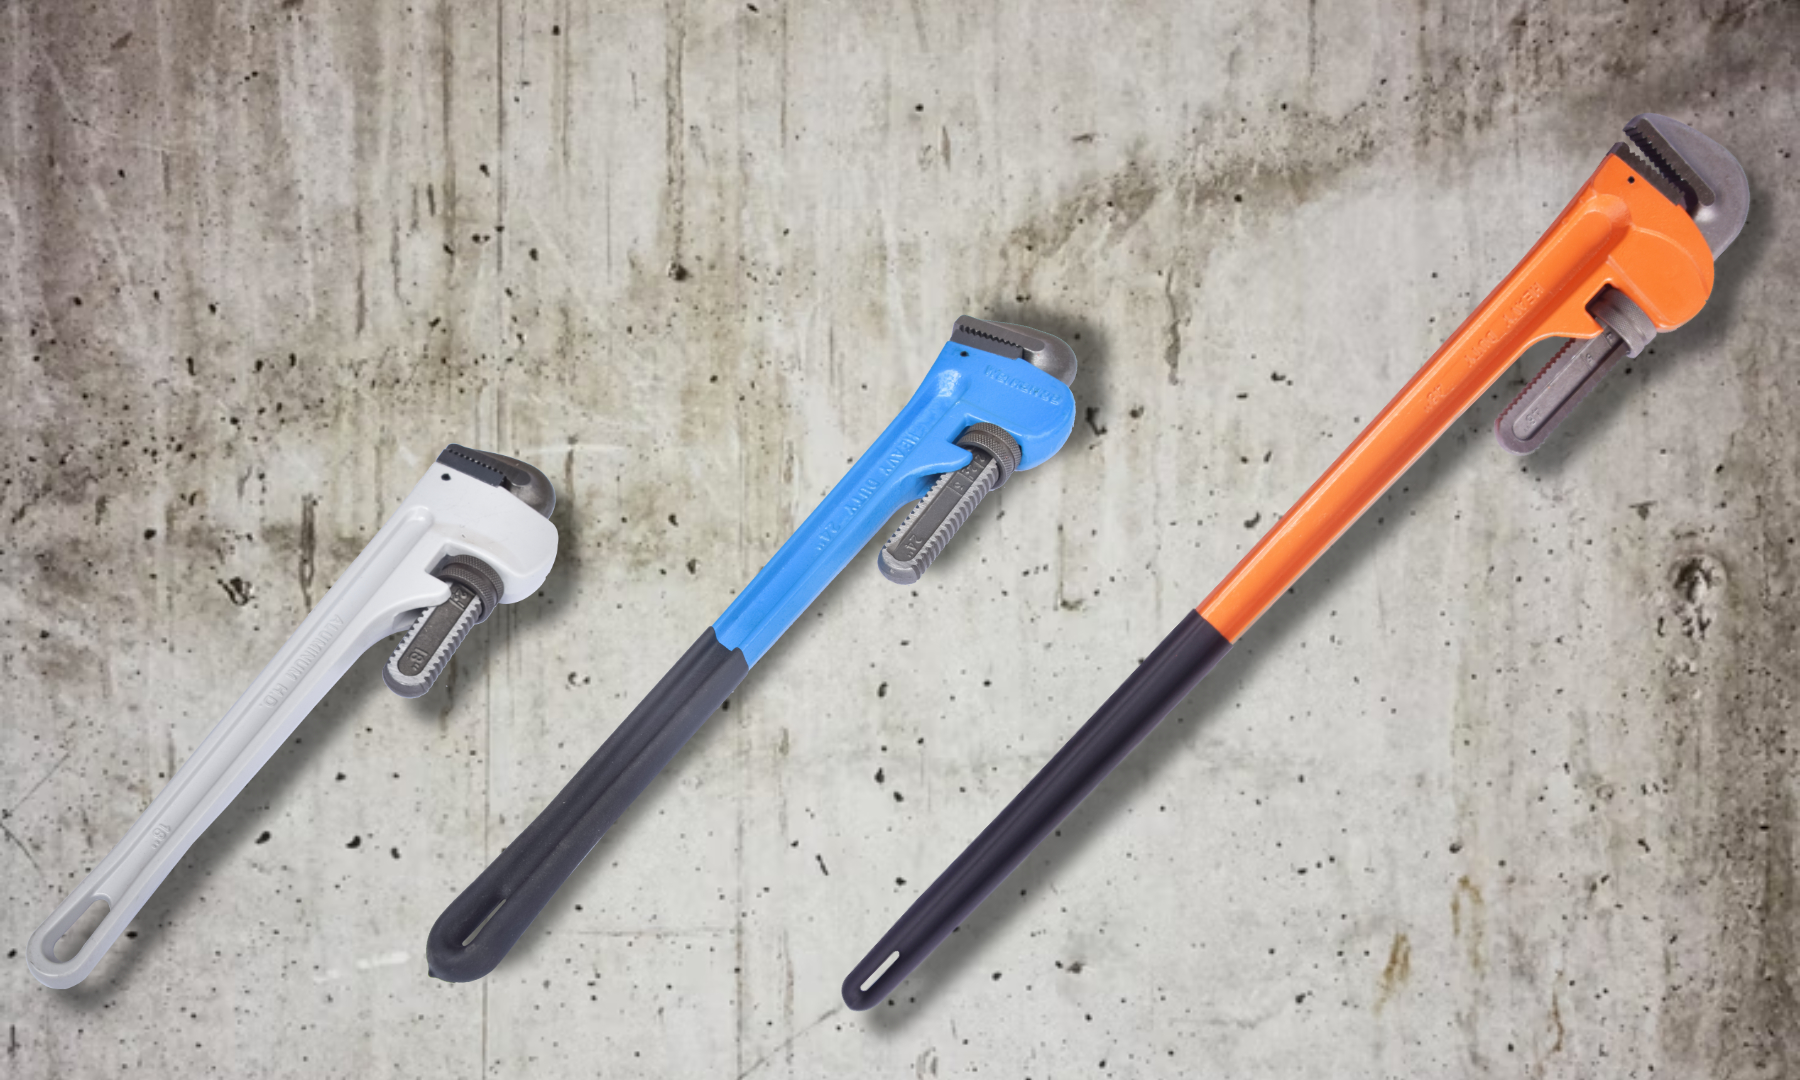 The type of pipe wrench for leaking pipe solutions